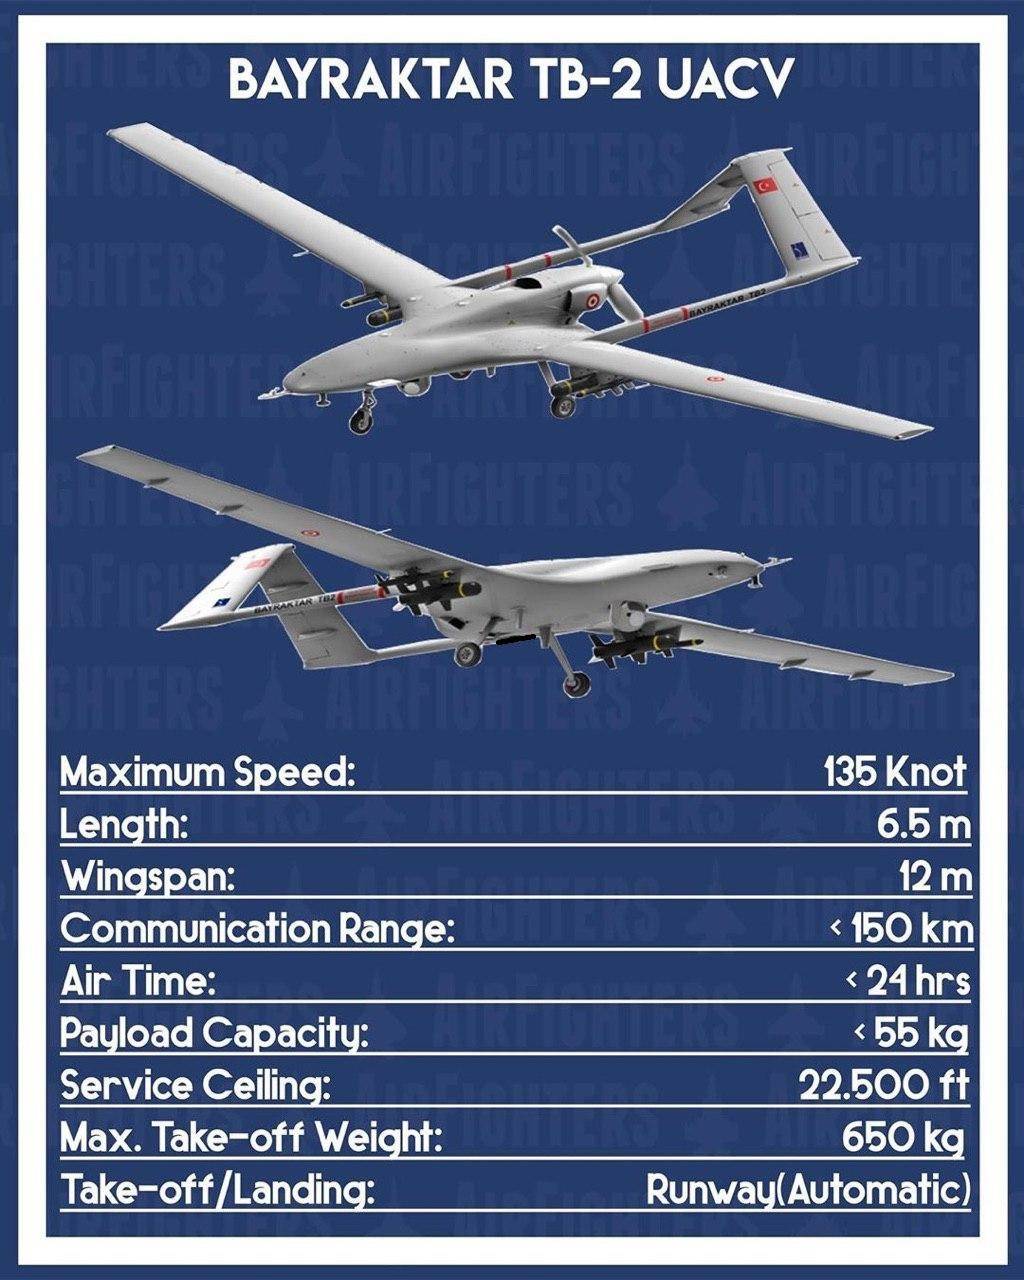 Quantix recon unmanned aircraft system, united states of america